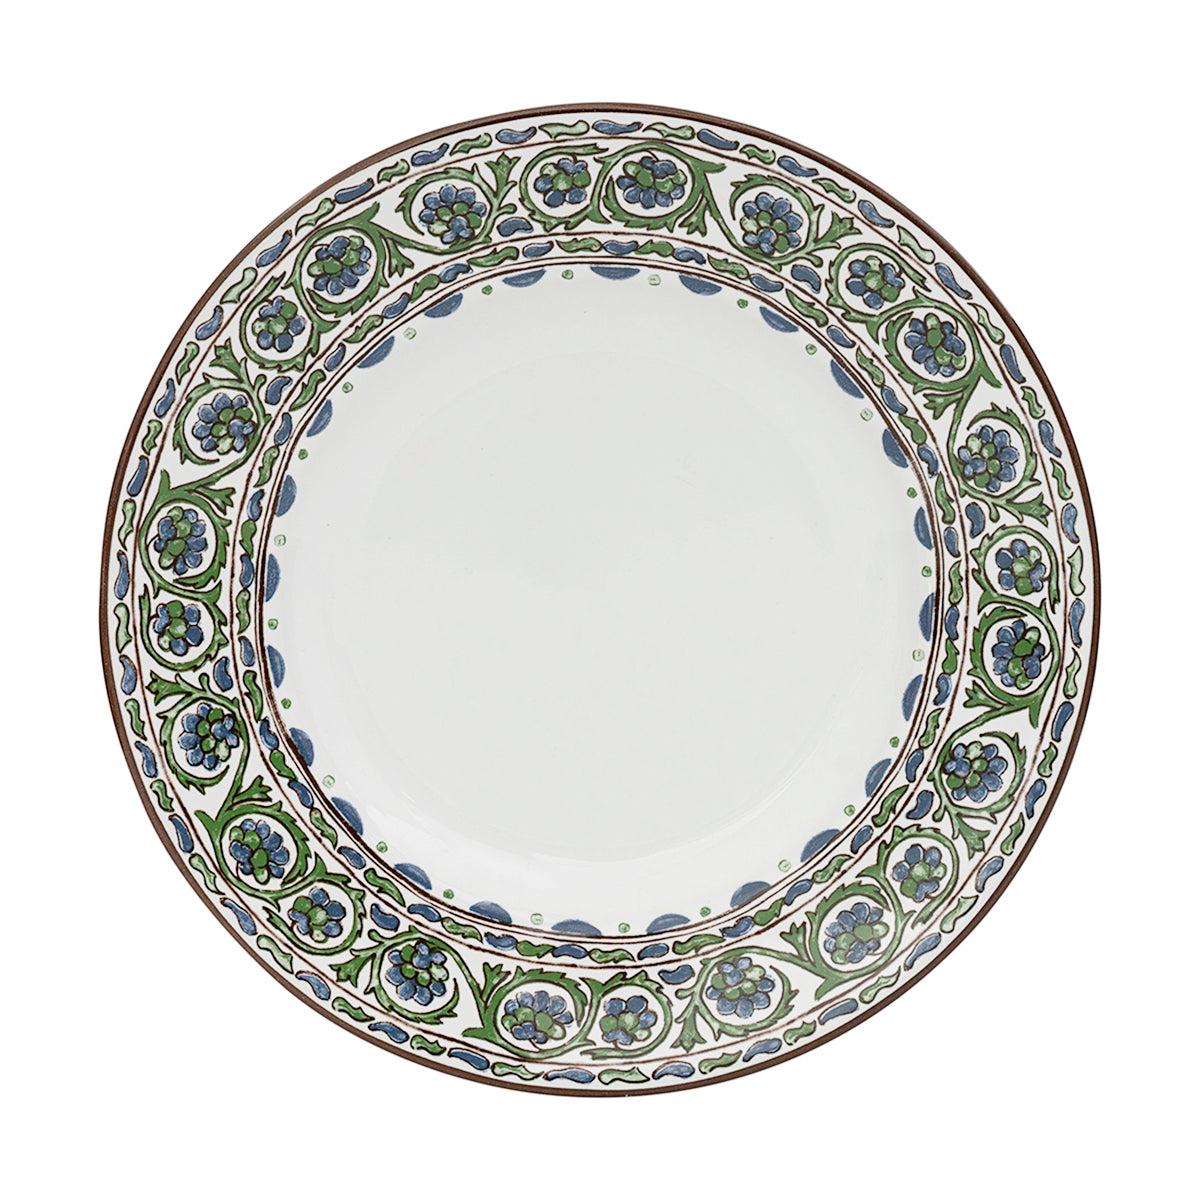 Juliska and Veronica Beard bring you a collaboration of dinnerware inspired by the colors and patterns of the Iberian coast. This dinner plate is banded with watercolored artwork evoking bohemian style.